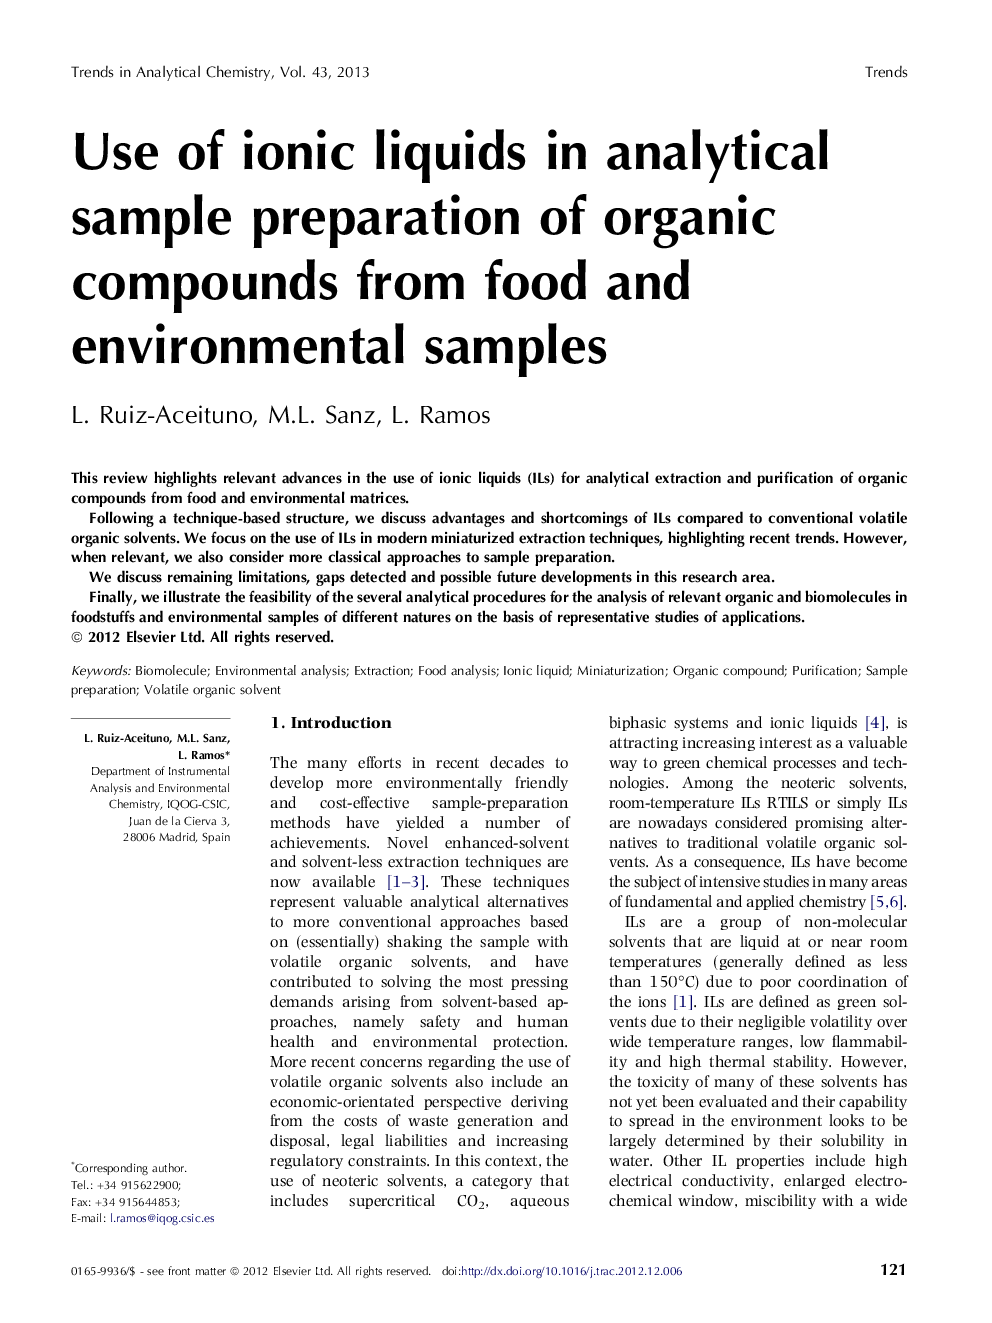 Use of ionic liquids in analytical sample preparation of organic compounds from food and environmental samples